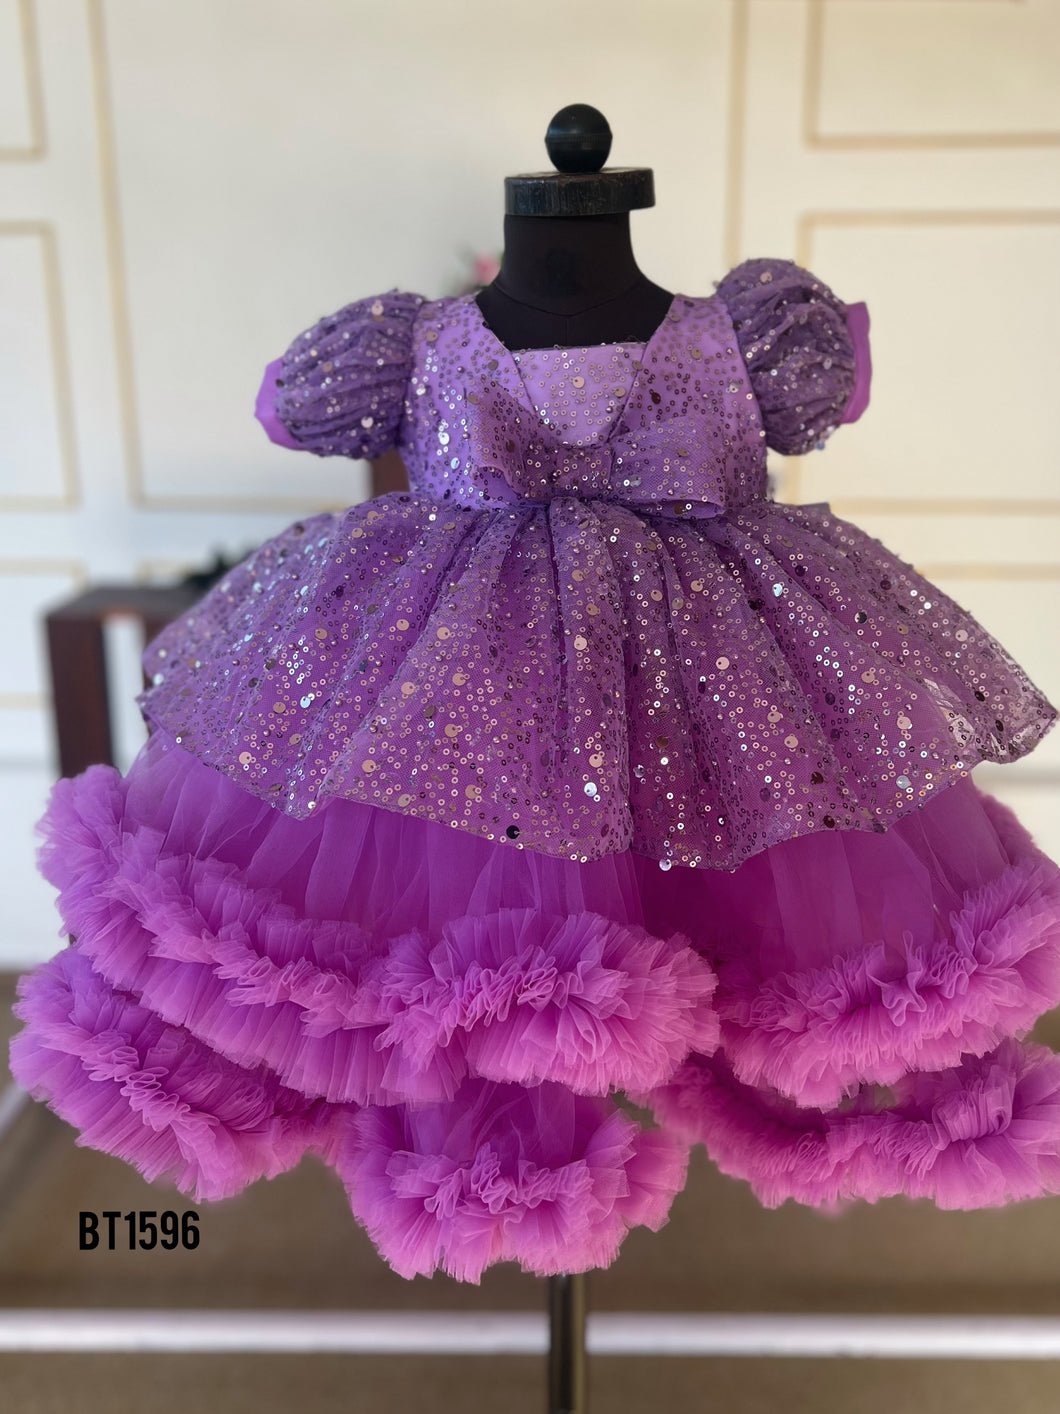 BT1596 Purple Bling Ruffle Birthday Party Dress For Baby Girls